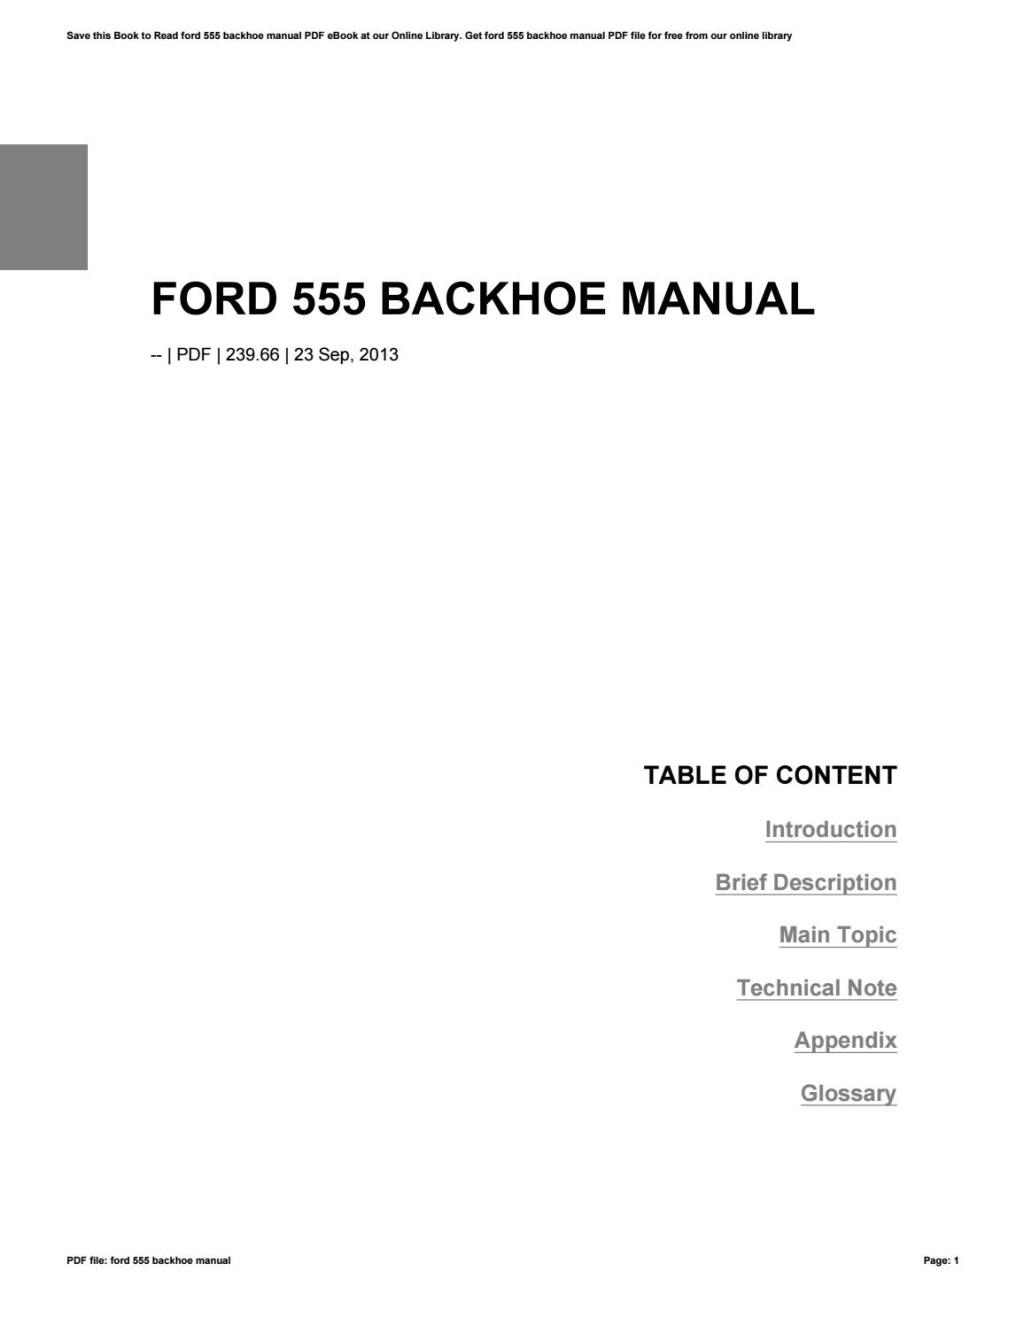 Picture of: Ford  backhoe manual by malove – Issuu